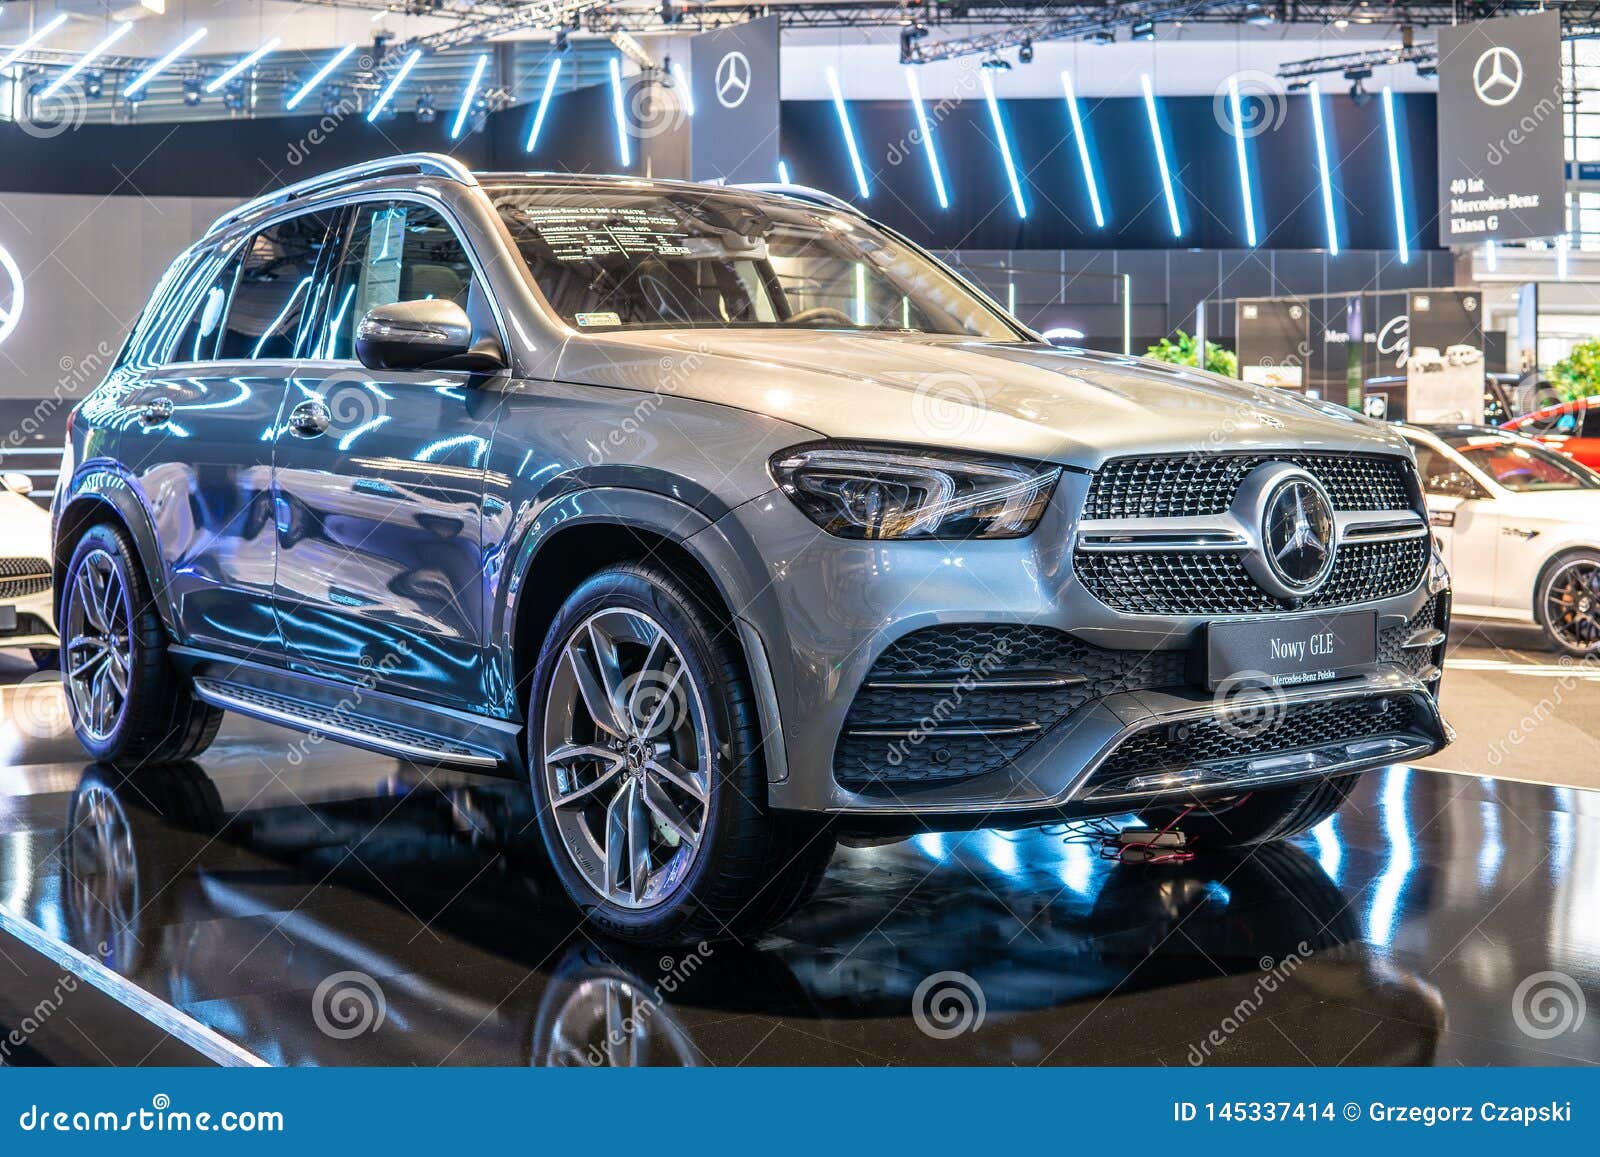 Mercedes Gle 4matic Fourth Generation W167 Gle Class Midsize Luxury Suv Produced By Mercedes Editorial Stock Image Image Of International Gleclass 145337414